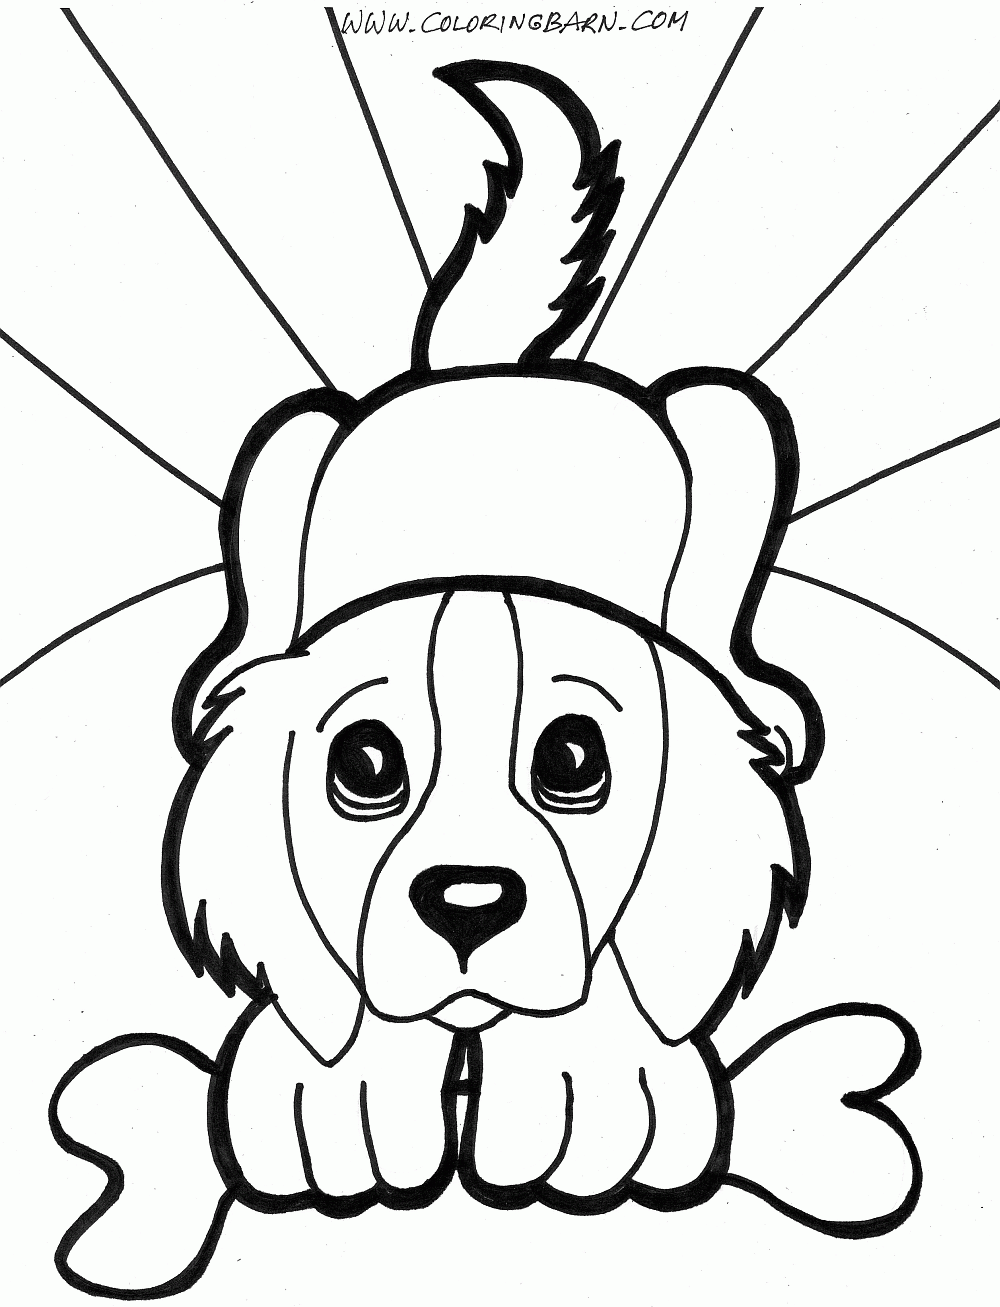 Printable Cute Dog Coloring Pages - Printable World Holiday